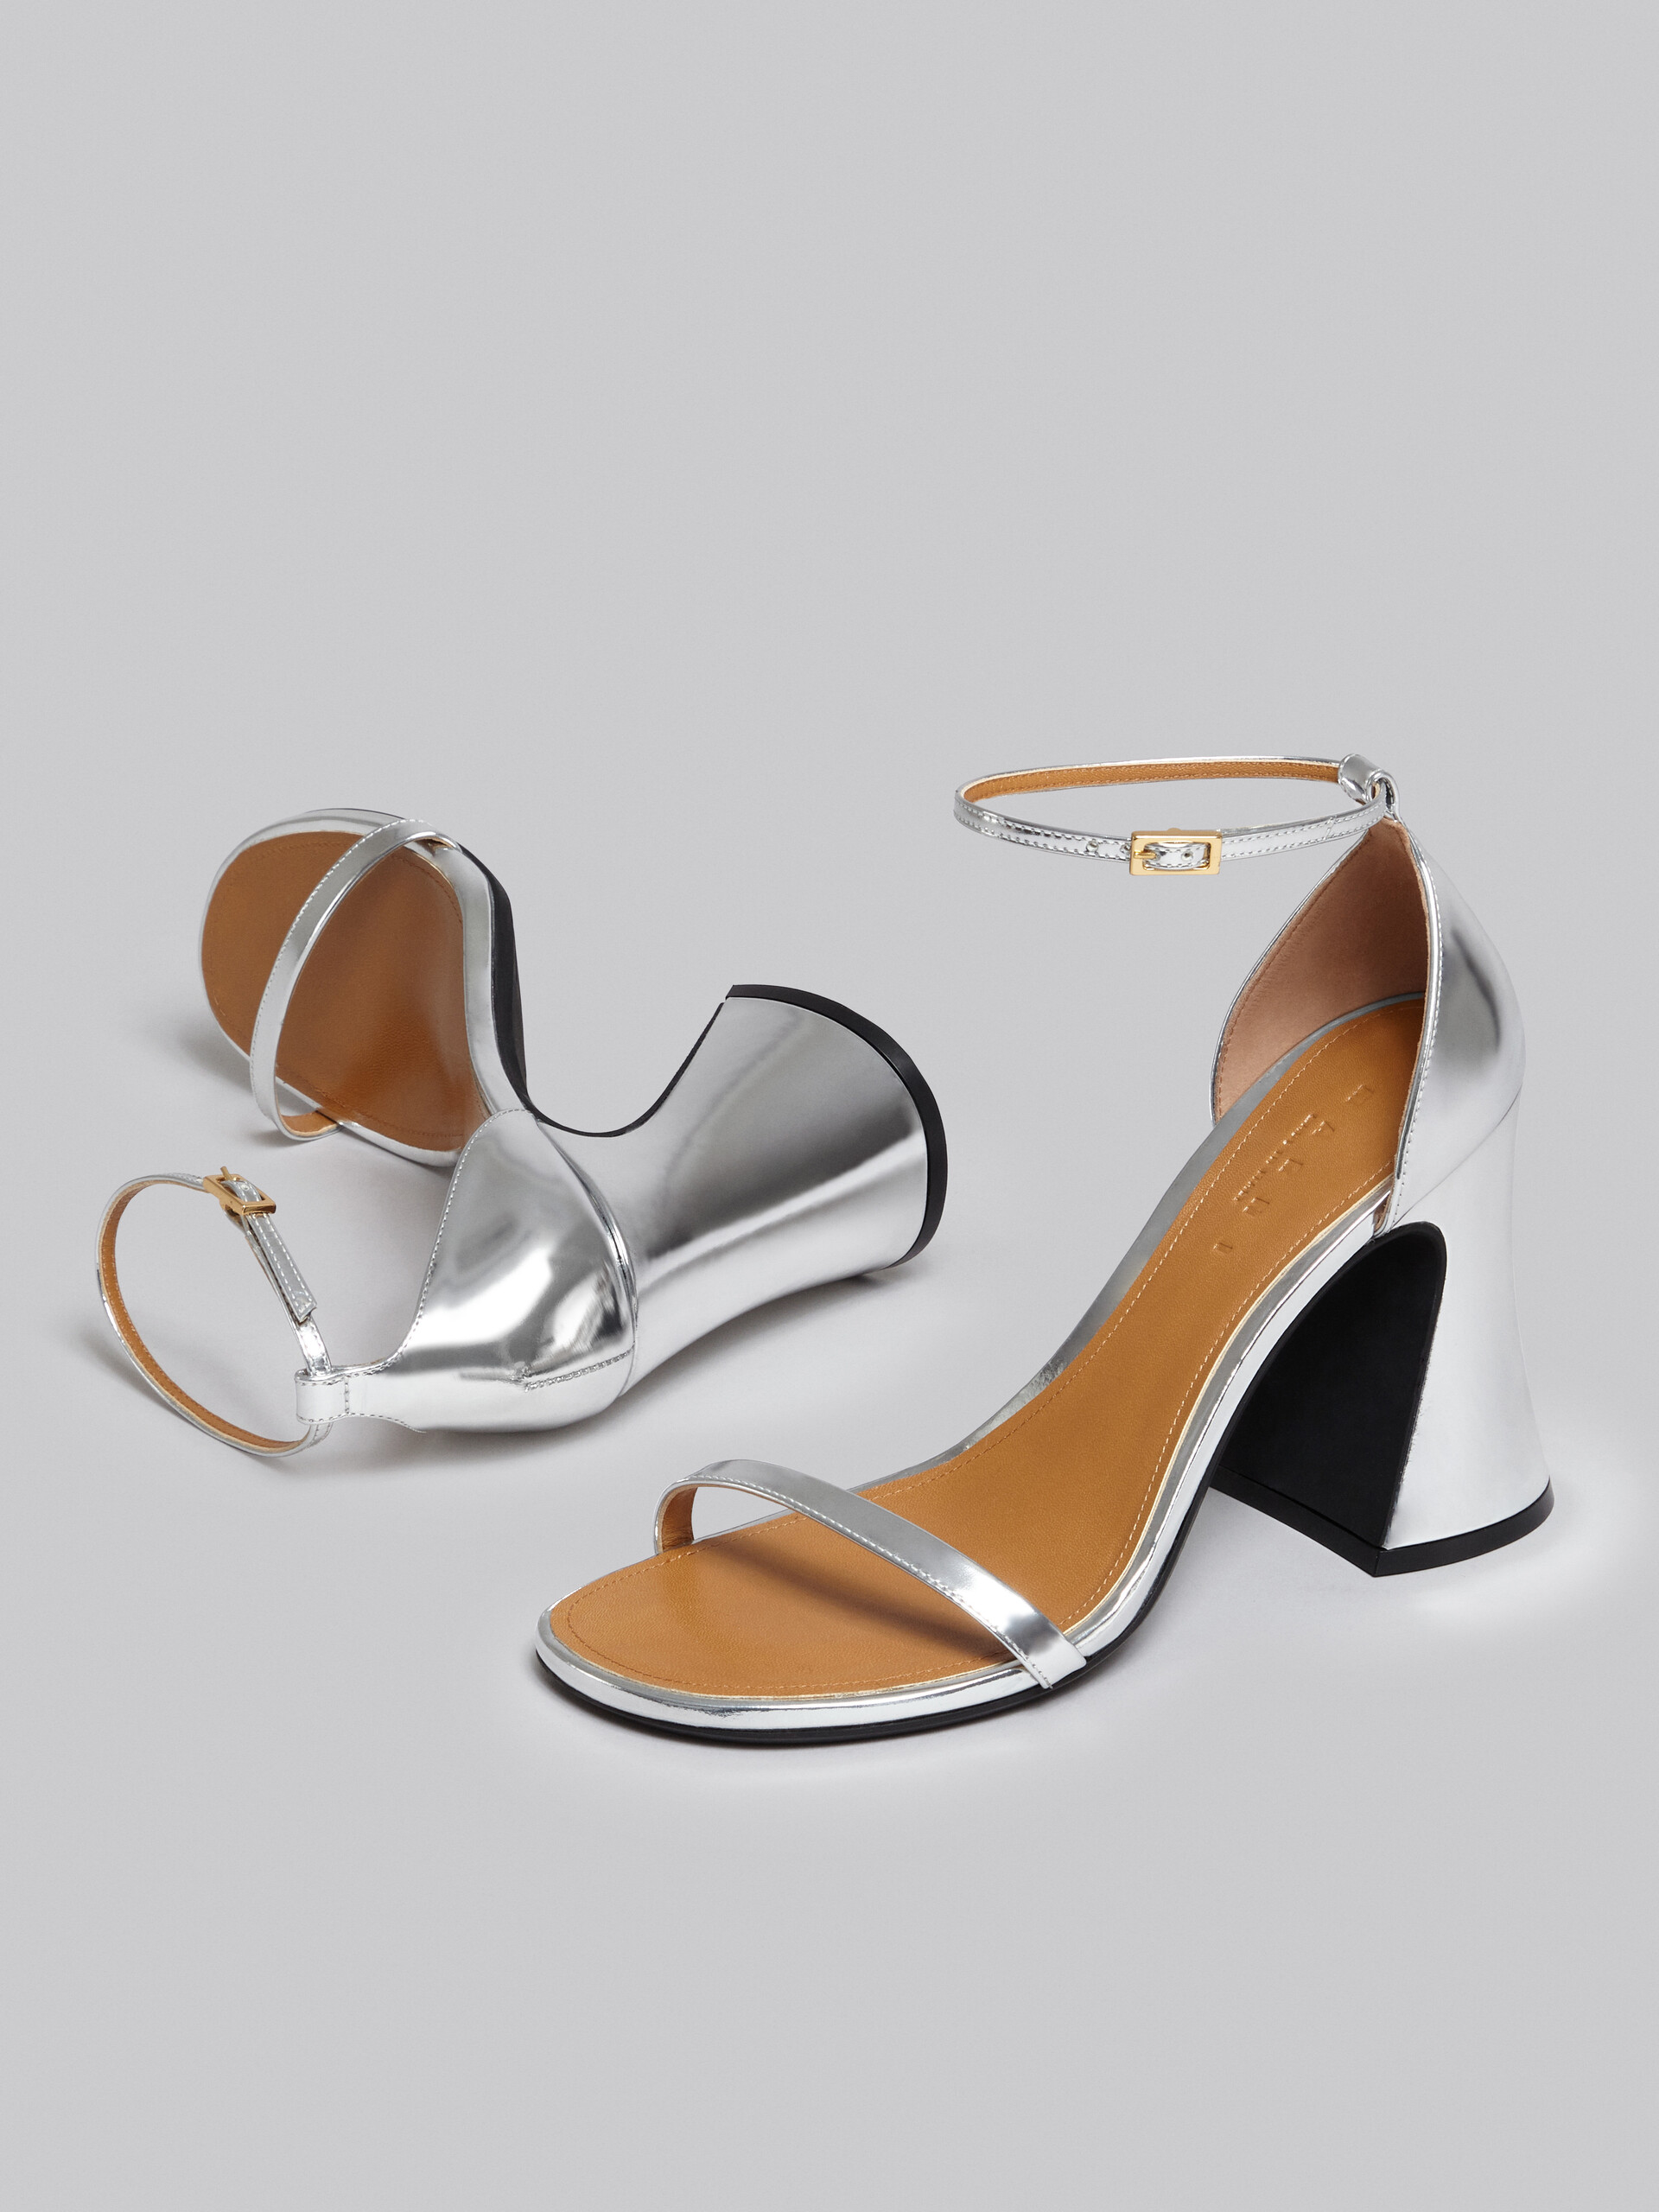 Silver mirrored leather sandal - Sandals - Image 5